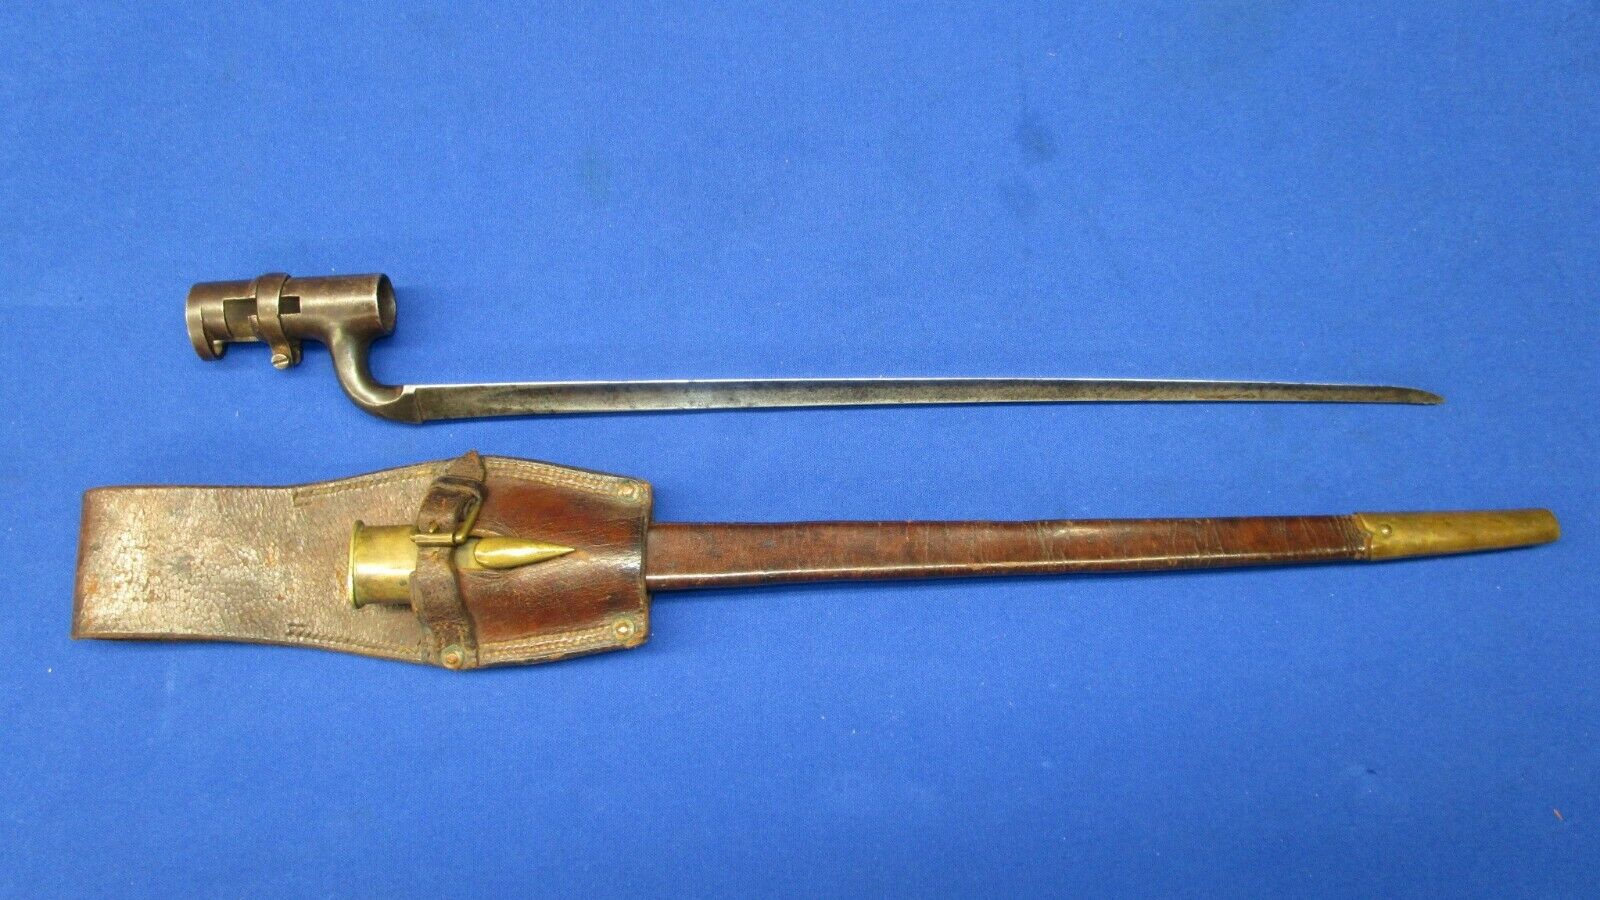 U.s. Civil War Imported Pattern 1853 Socket Bayonet For The Enfield Rifle